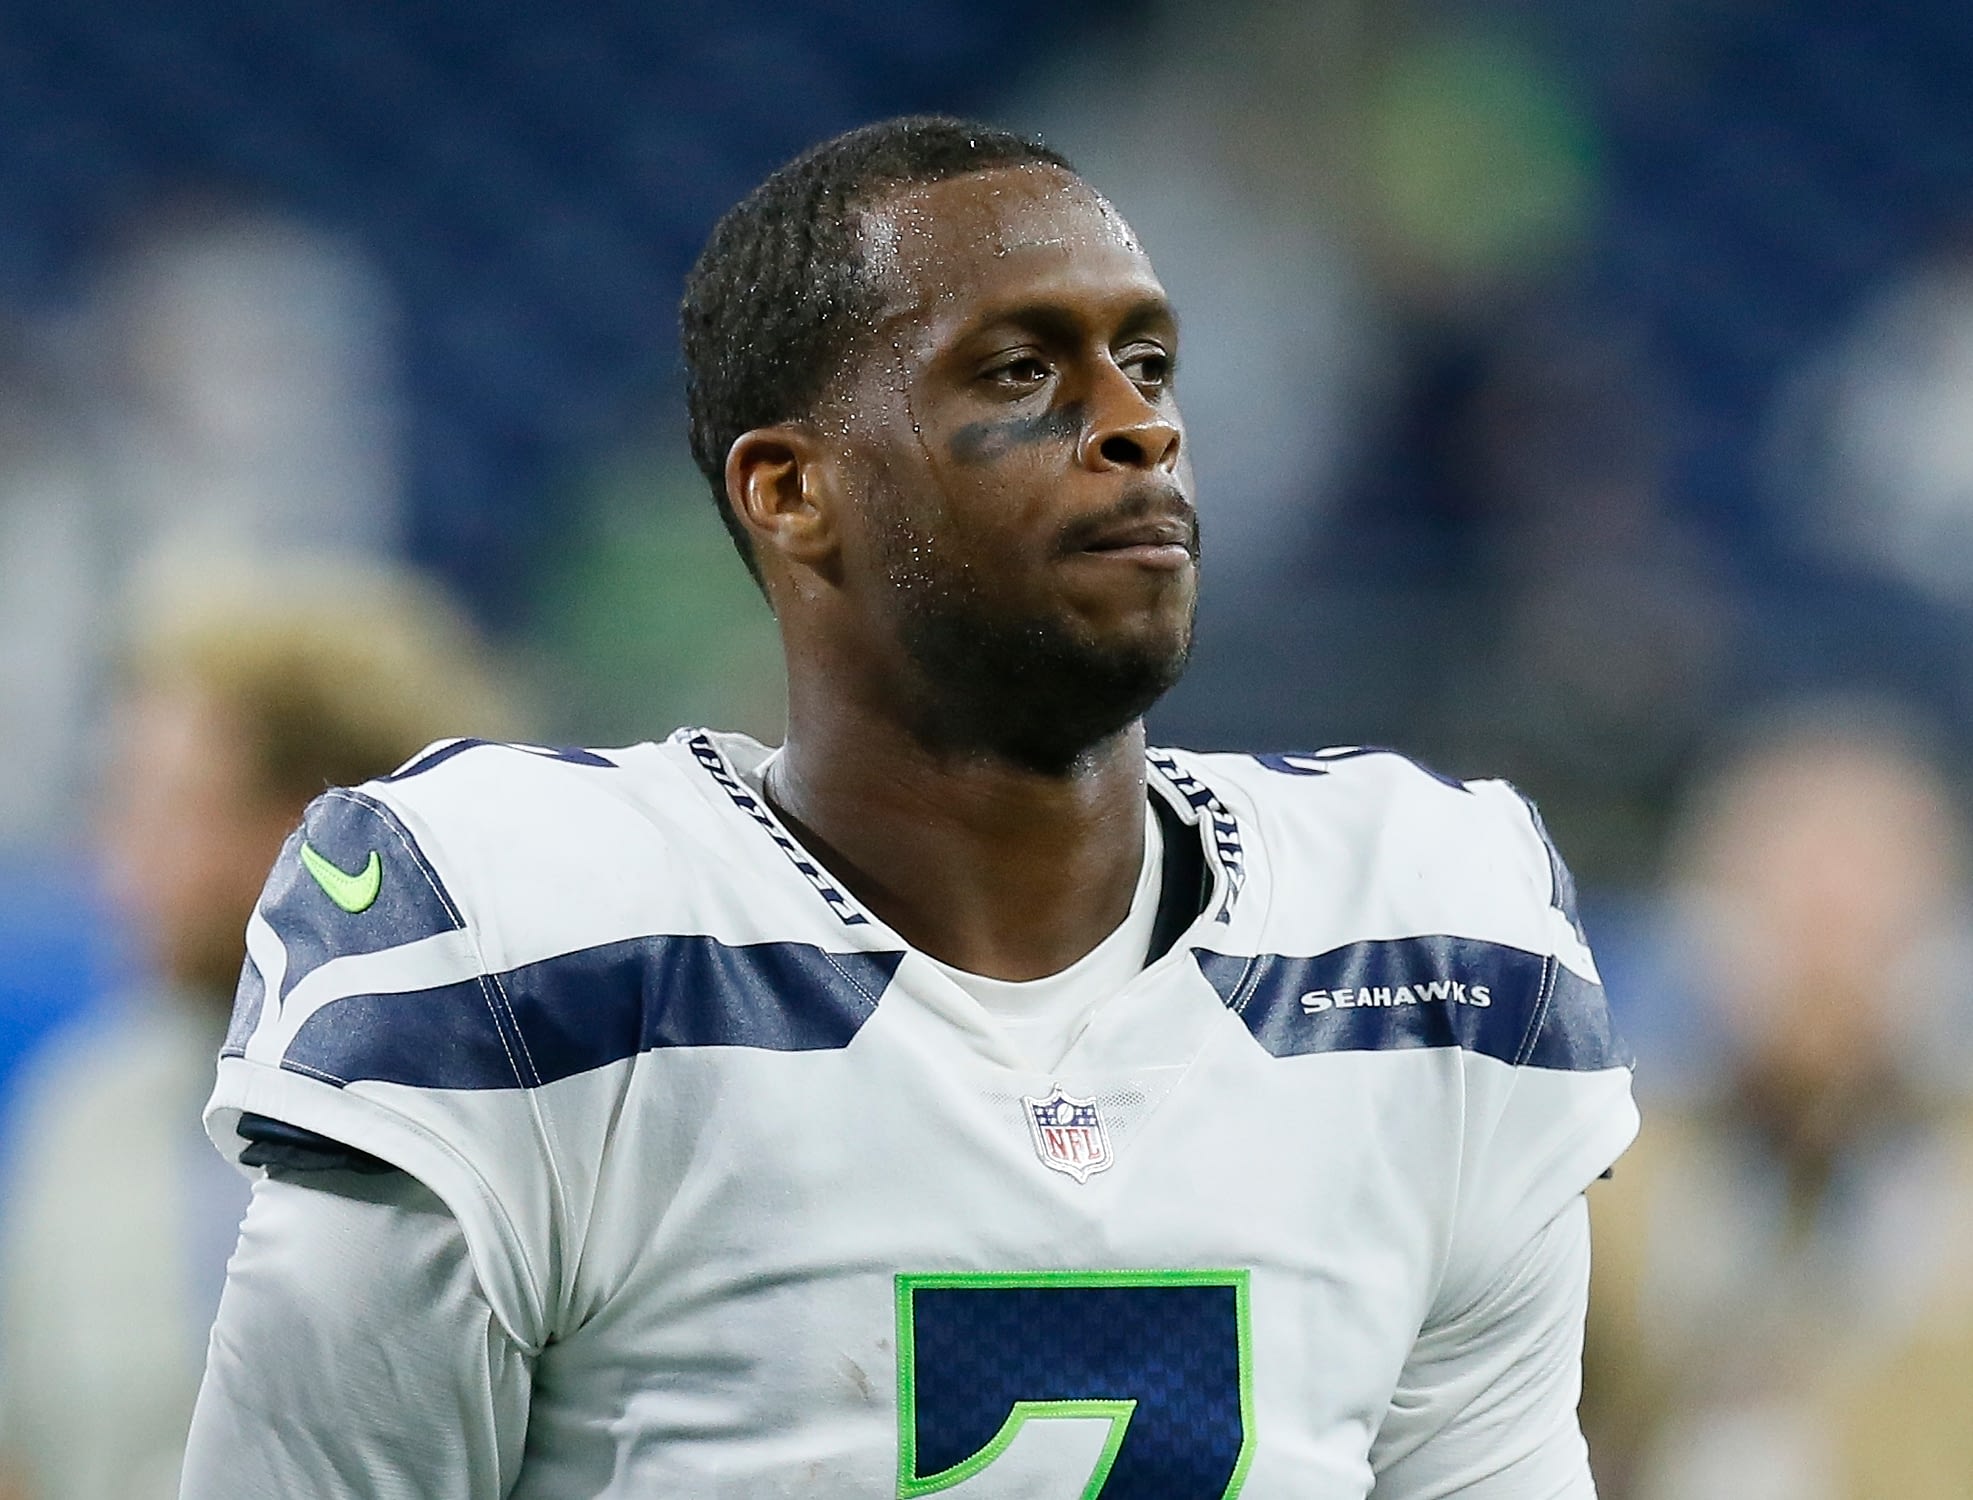 Is Geno Smith Worth a Fantasy Football Waiver Wire Pickup Amid His Impressive Start to the NFL Season?